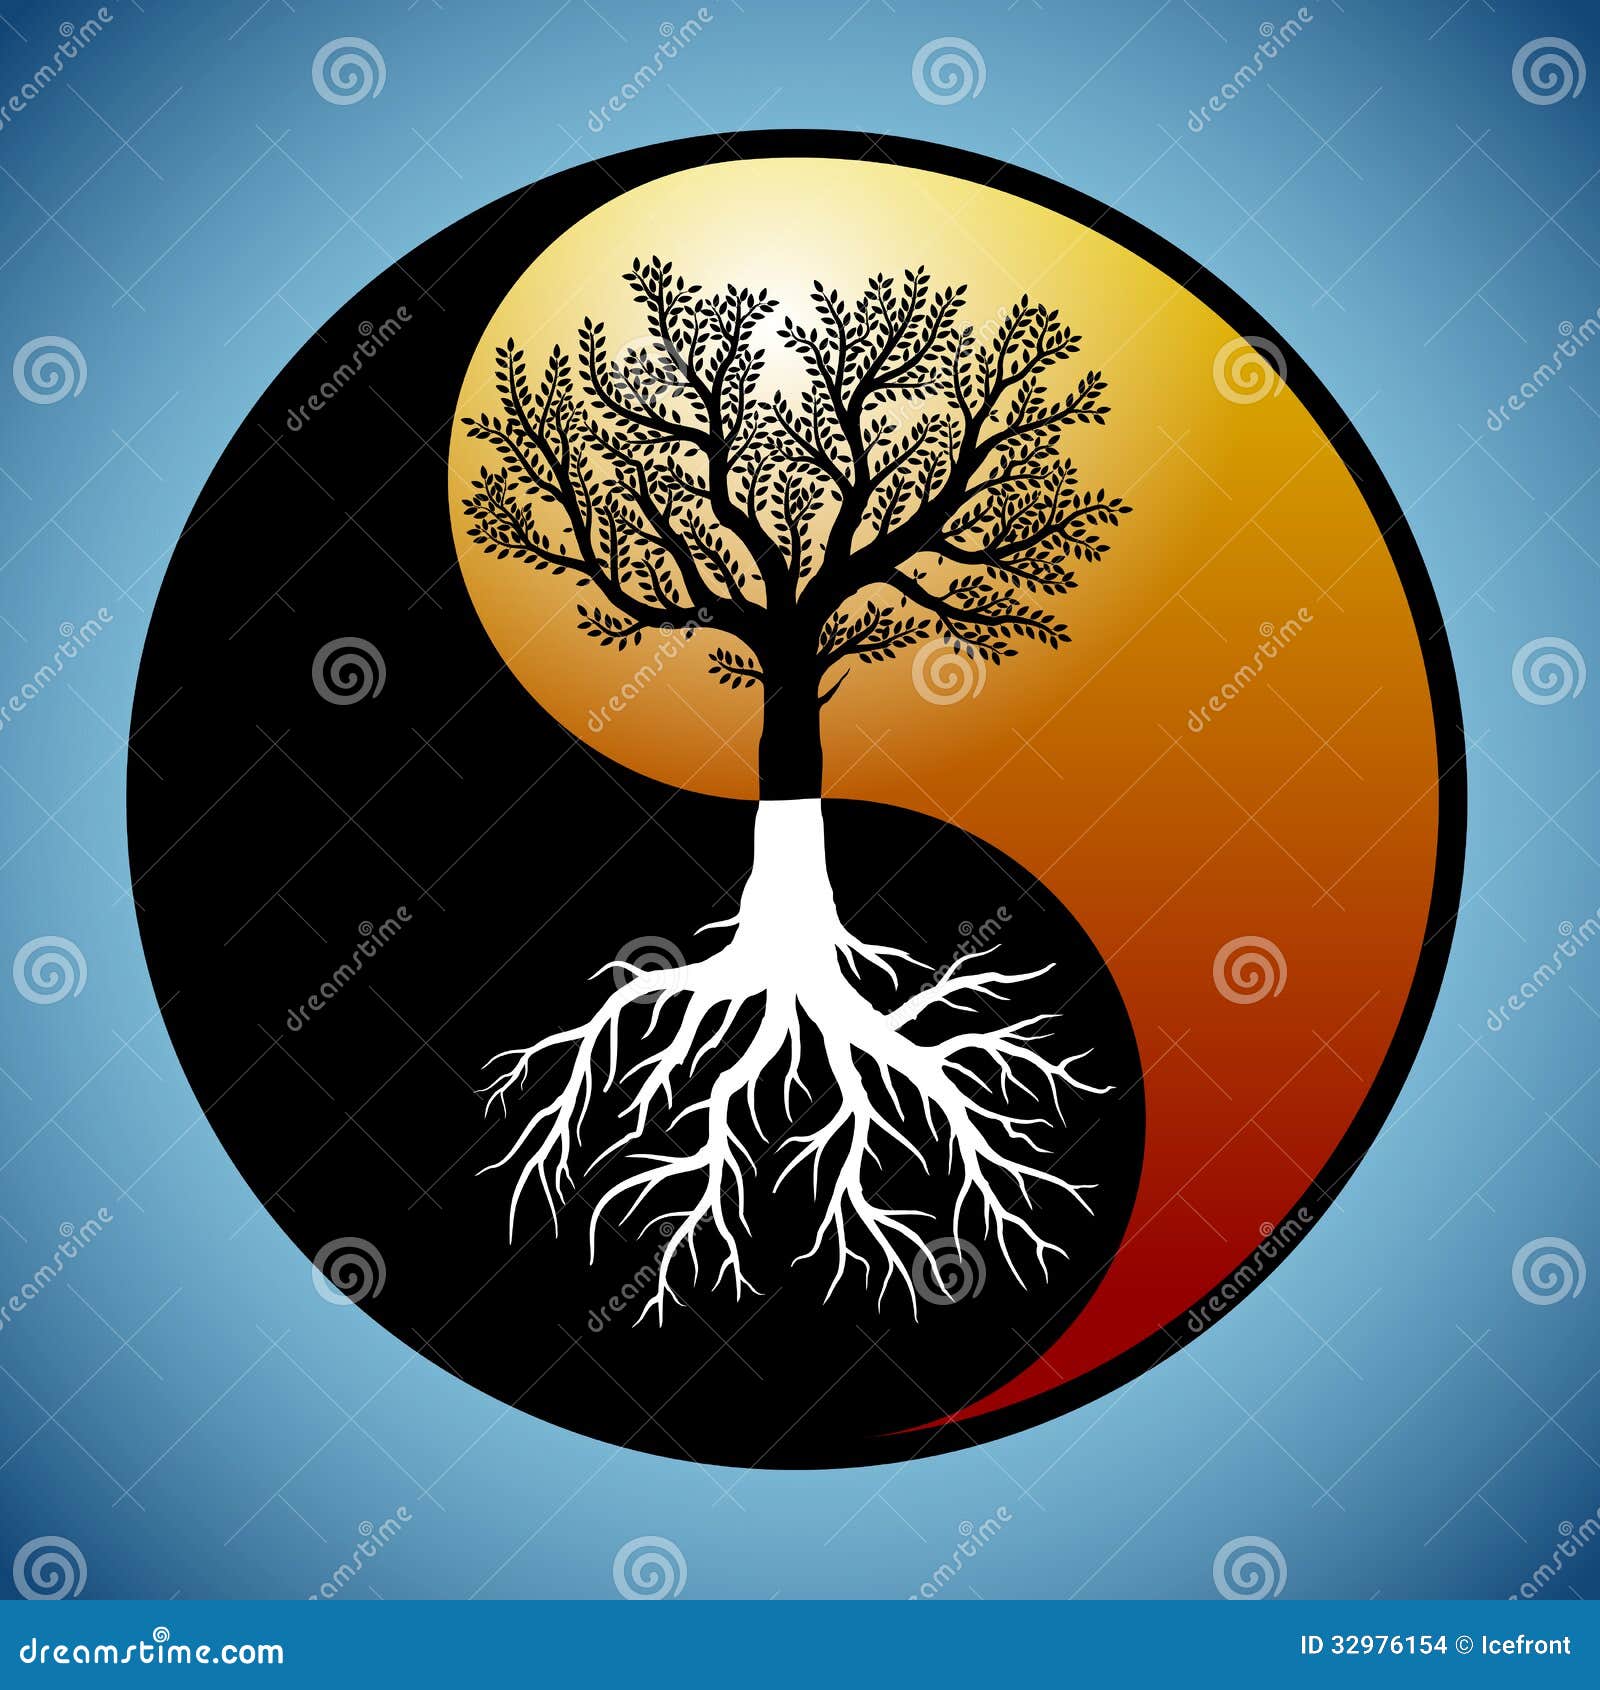 tree and its roots in yin yang 